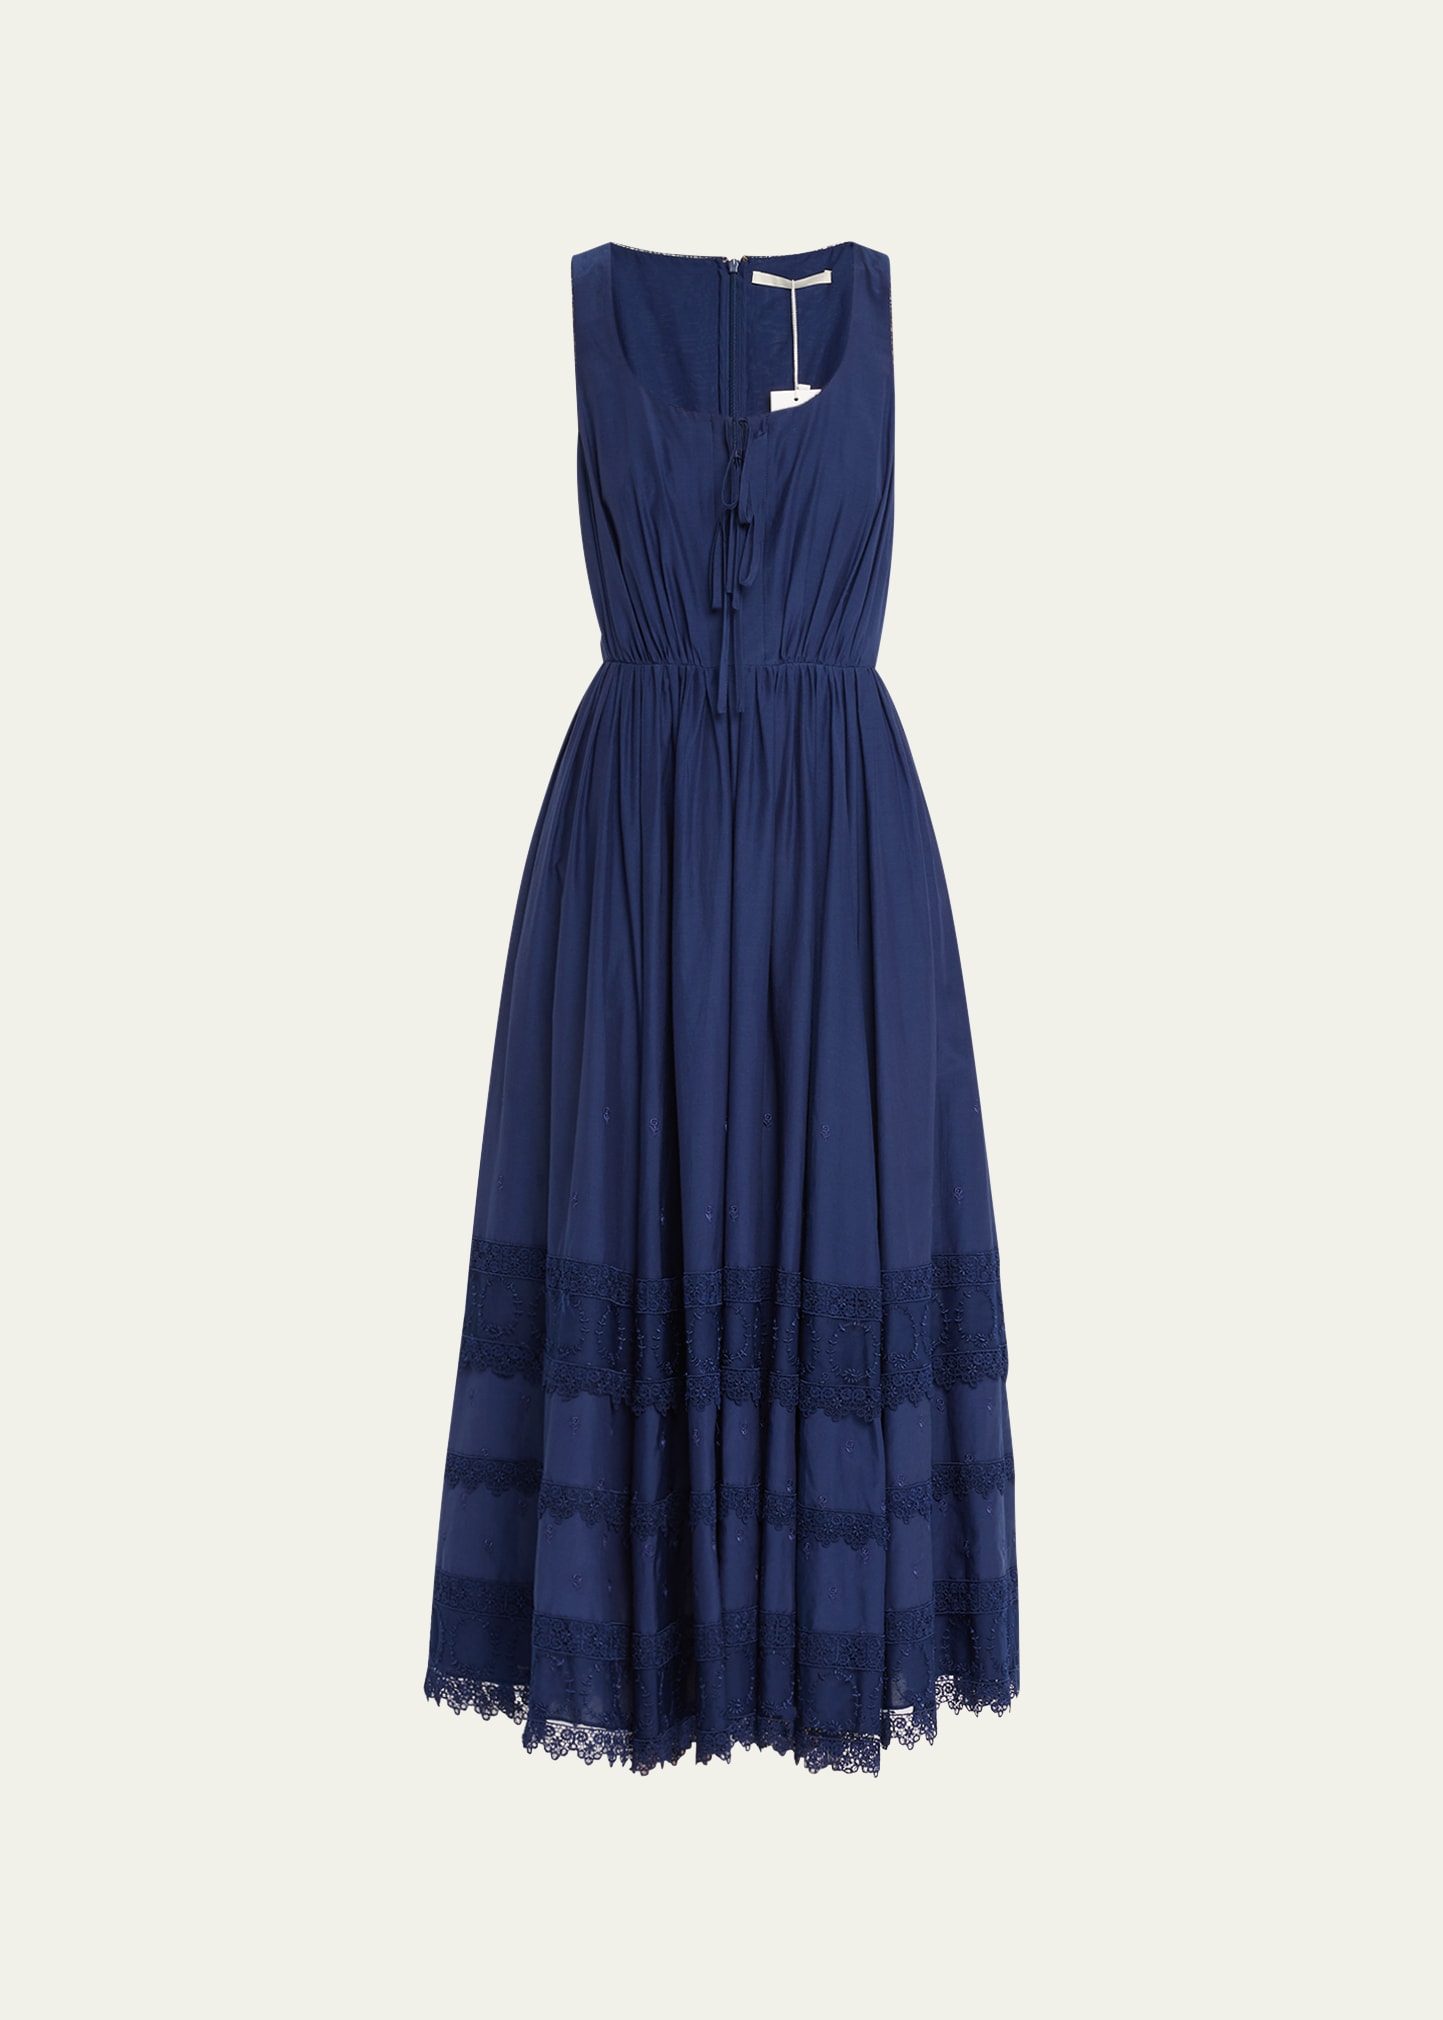 Jason Wu Collection Cotton Voile Midi Dress With Tiered Lace Details In Bright Navy